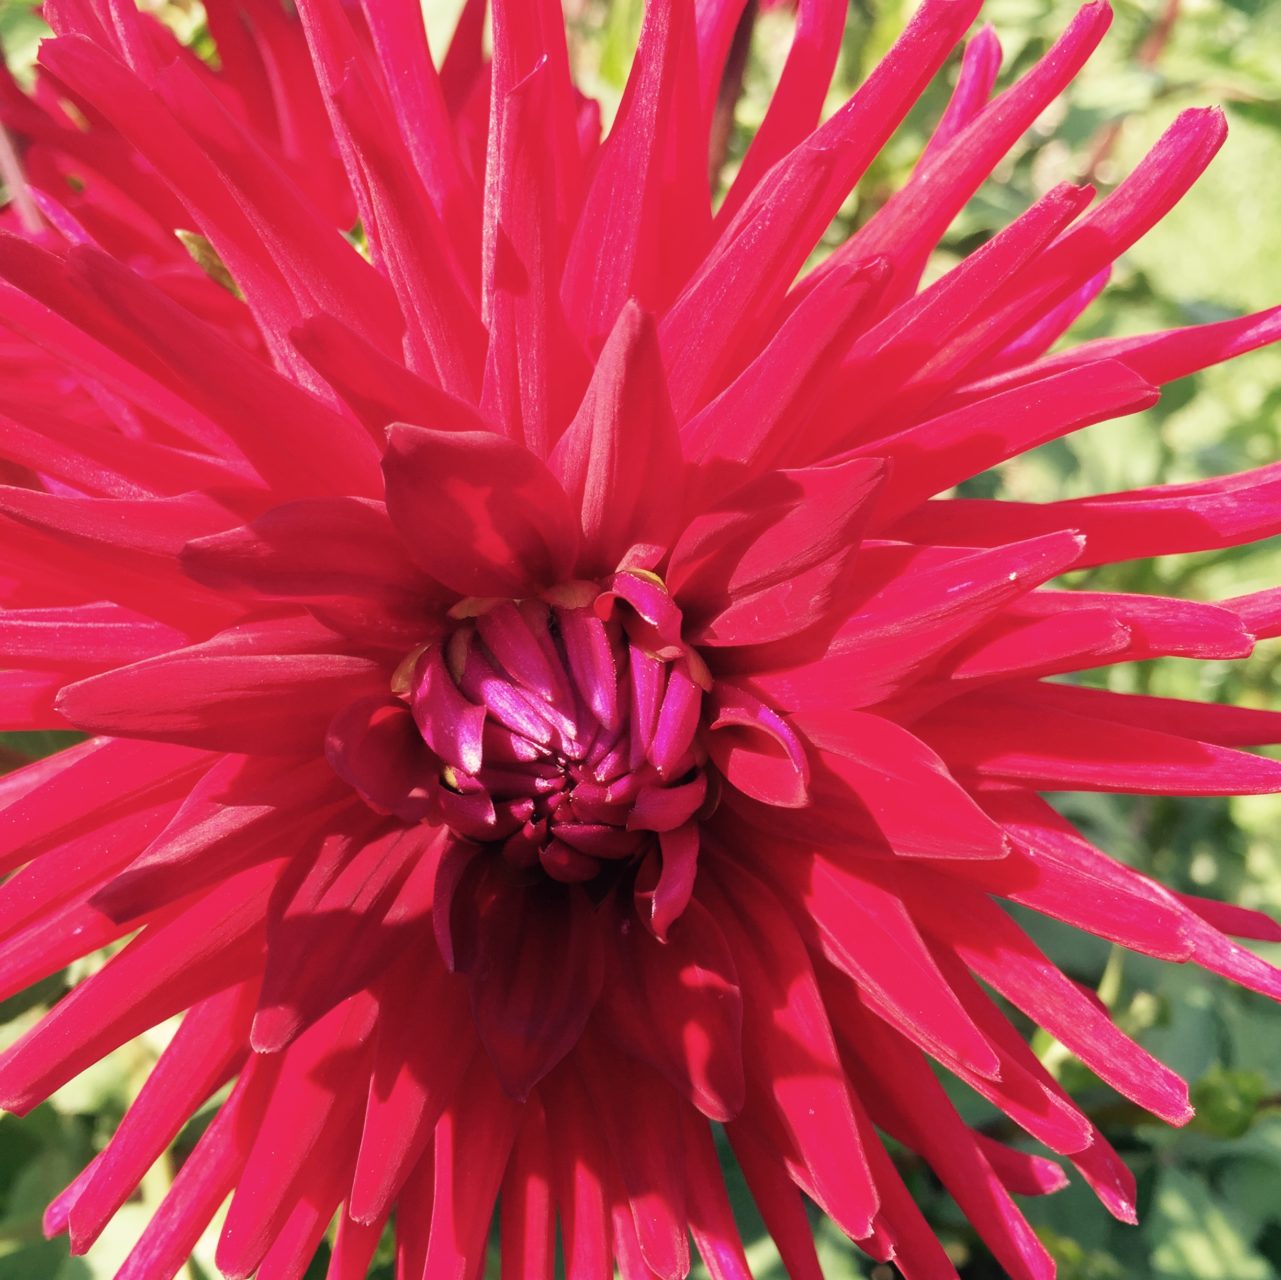 See this collection of dahlias at grand chateau Bourdaisiere